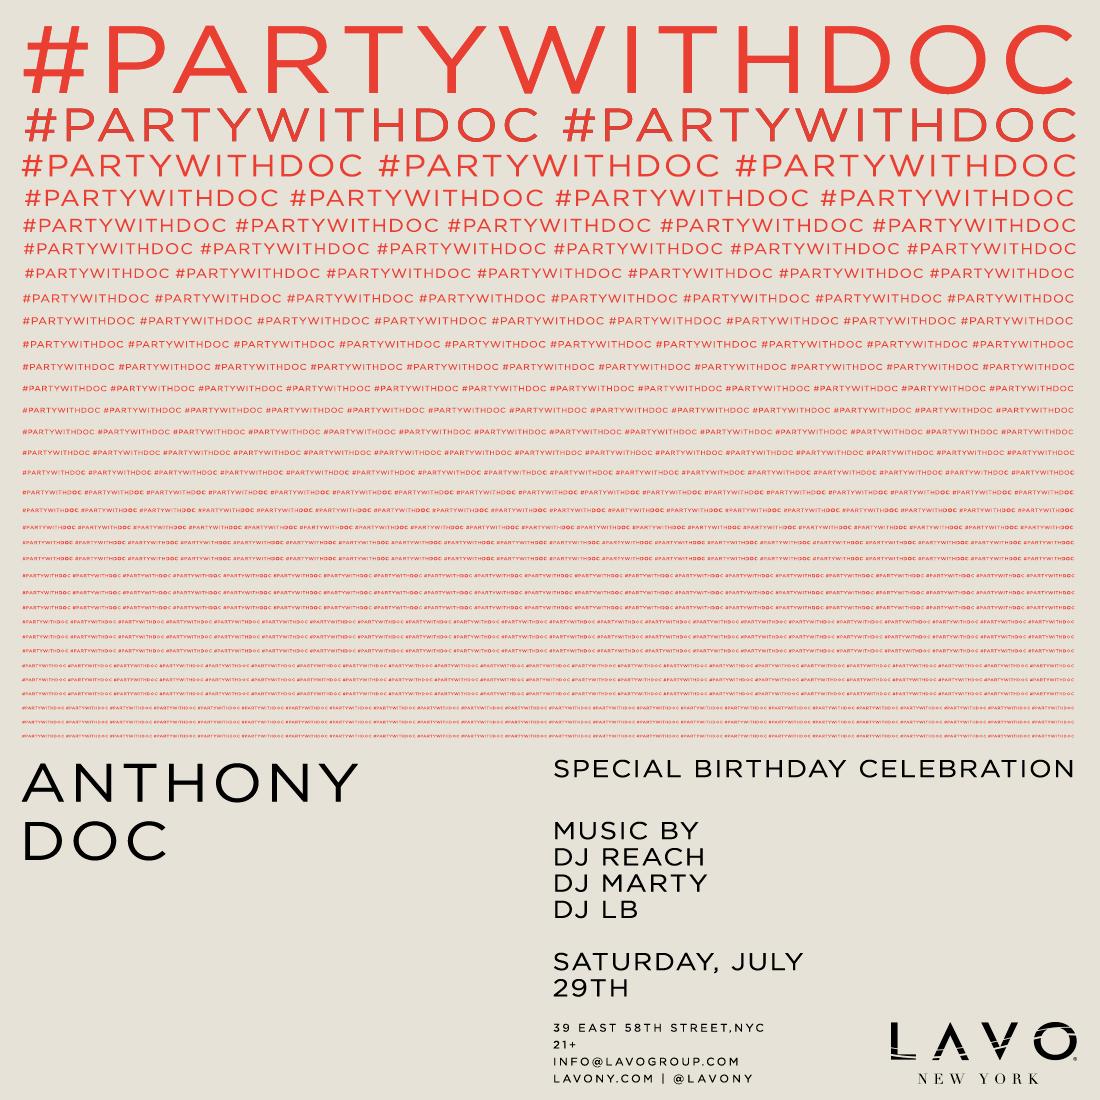 PARTY WITH DOC Birthday Extravaganza at LAVO